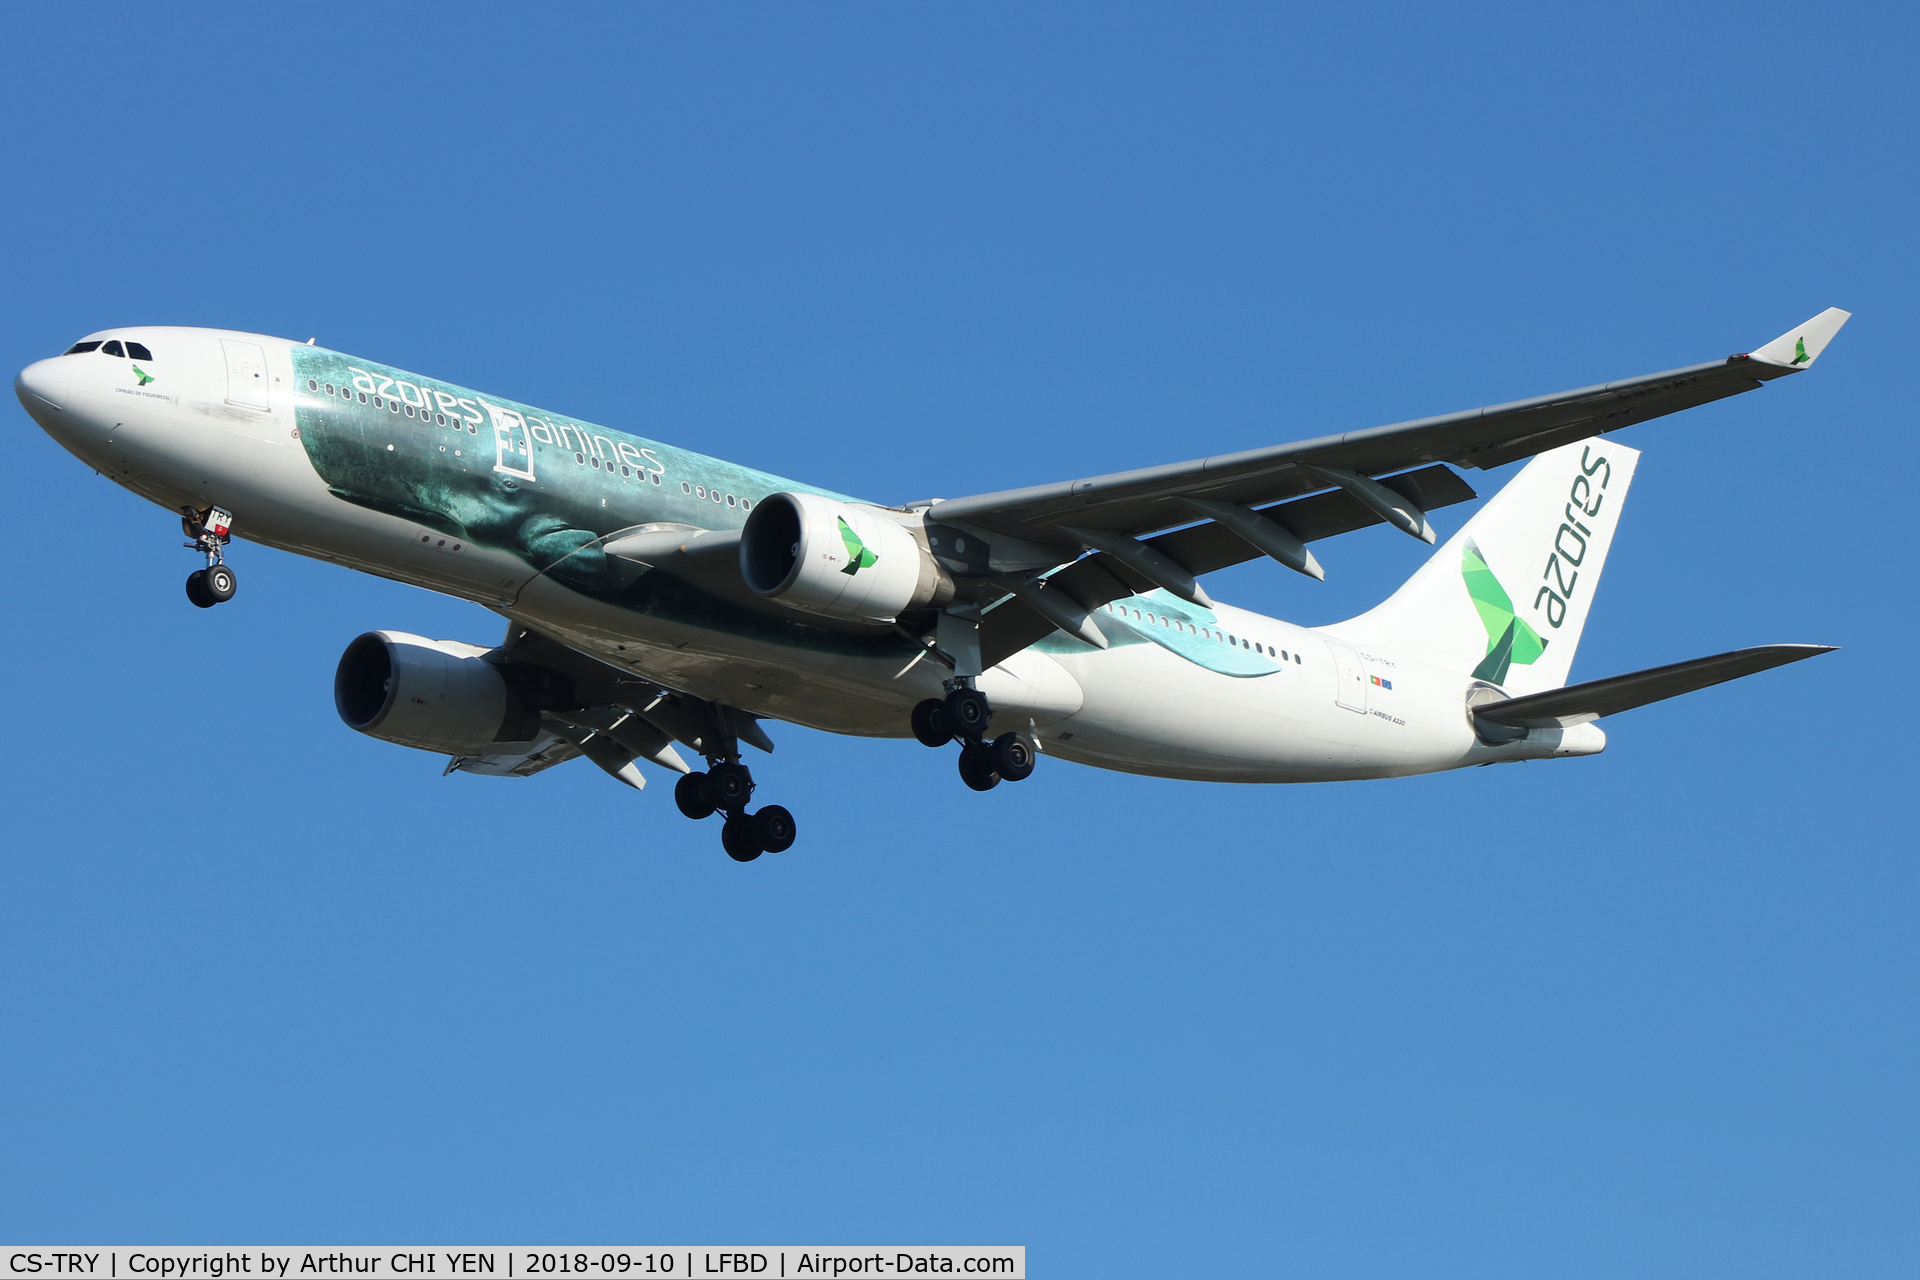 CS-TRY, 2008 Airbus A330-223 C/N 970, Azores Airlines A330 at BOD.